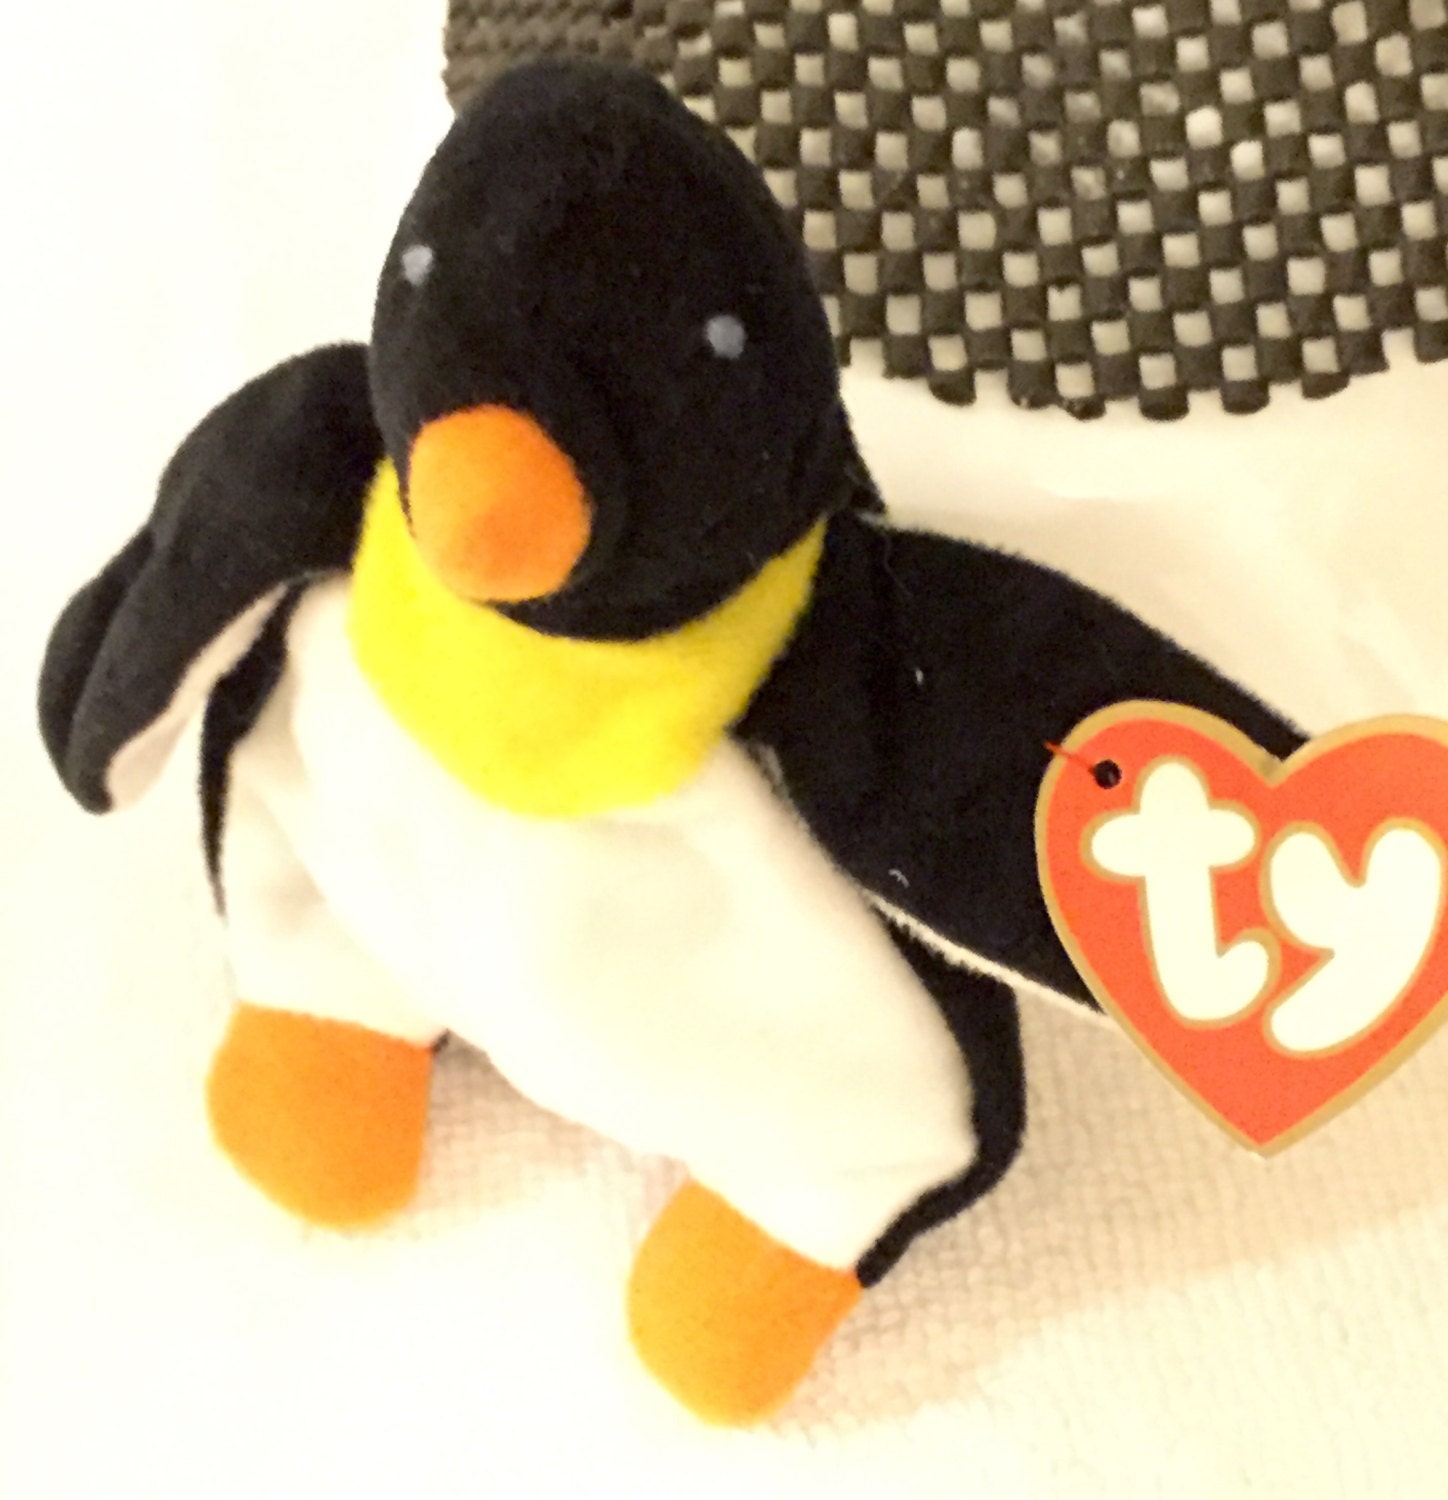 Ty Beanie Babies Waddle the Penguin by BeanieBabiesandToys